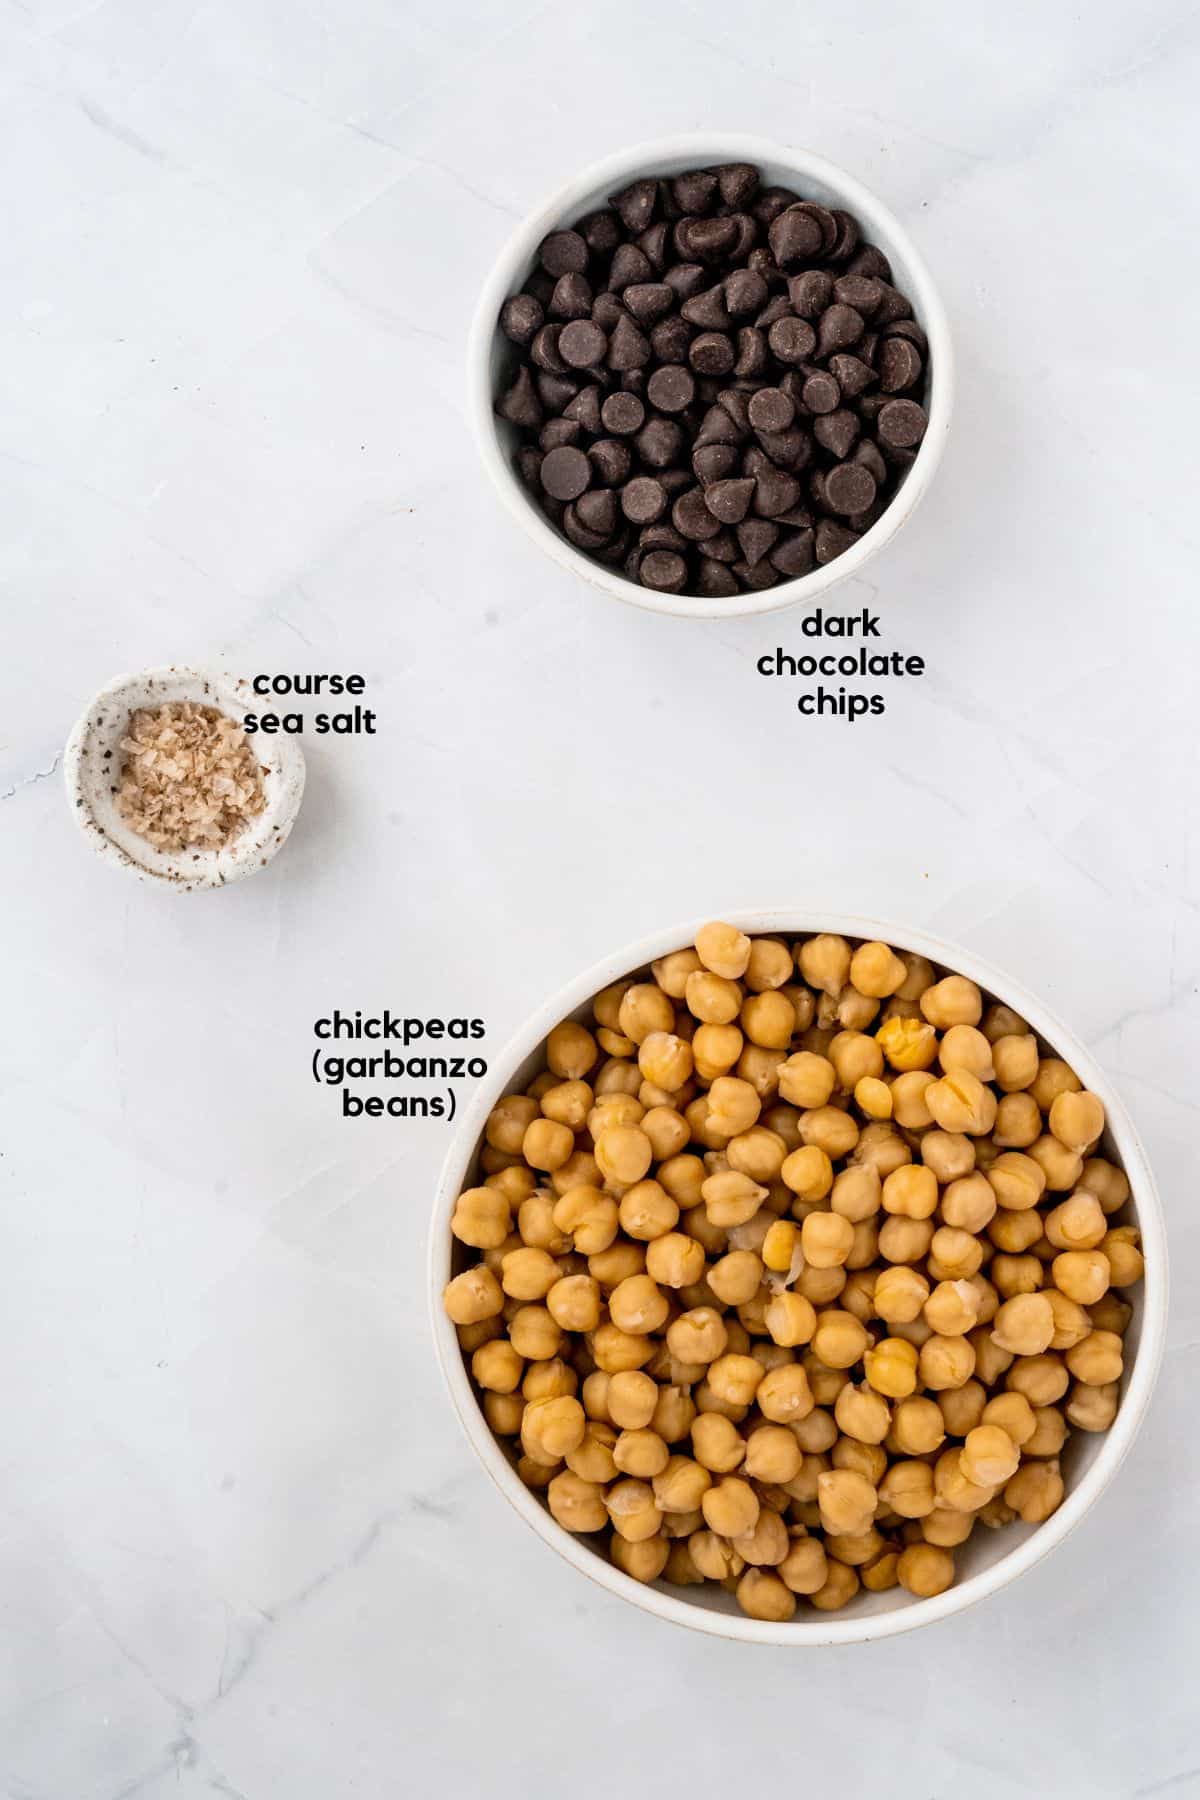 labelled ingredients for chocolate covered chickpeas.